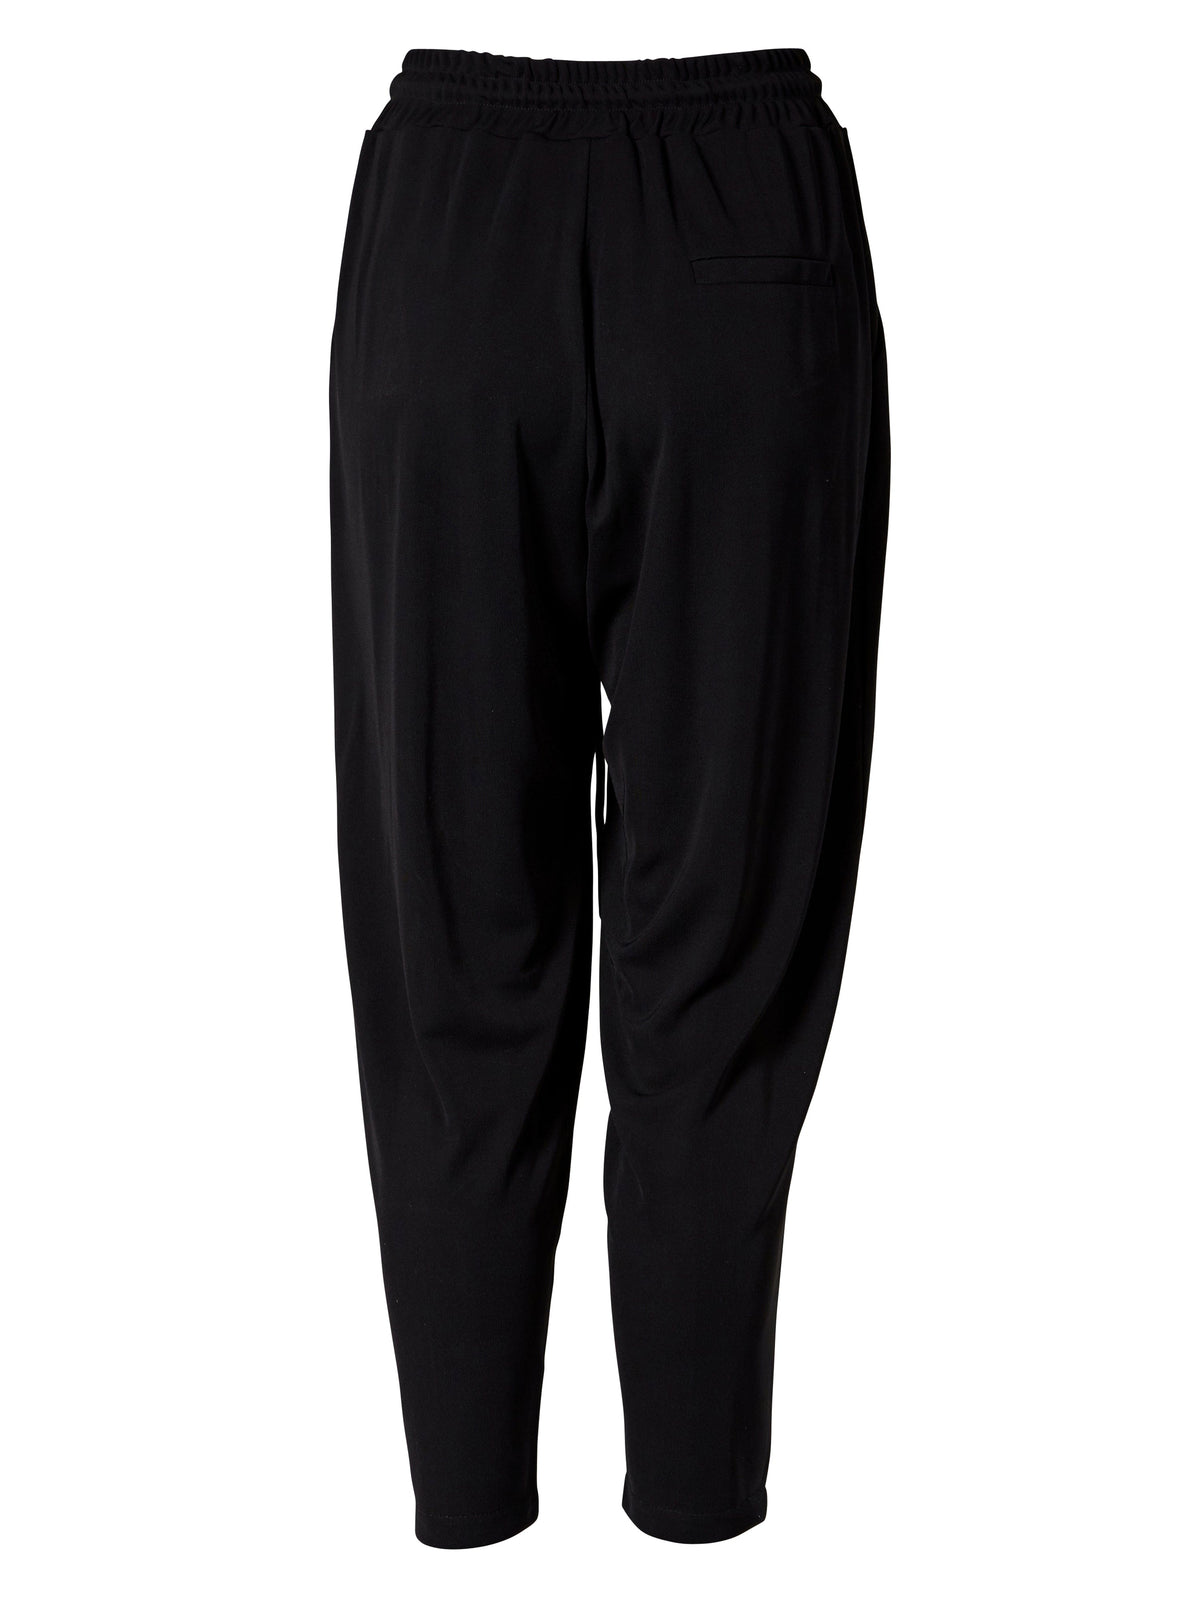 NÜ Relaxed Trouser